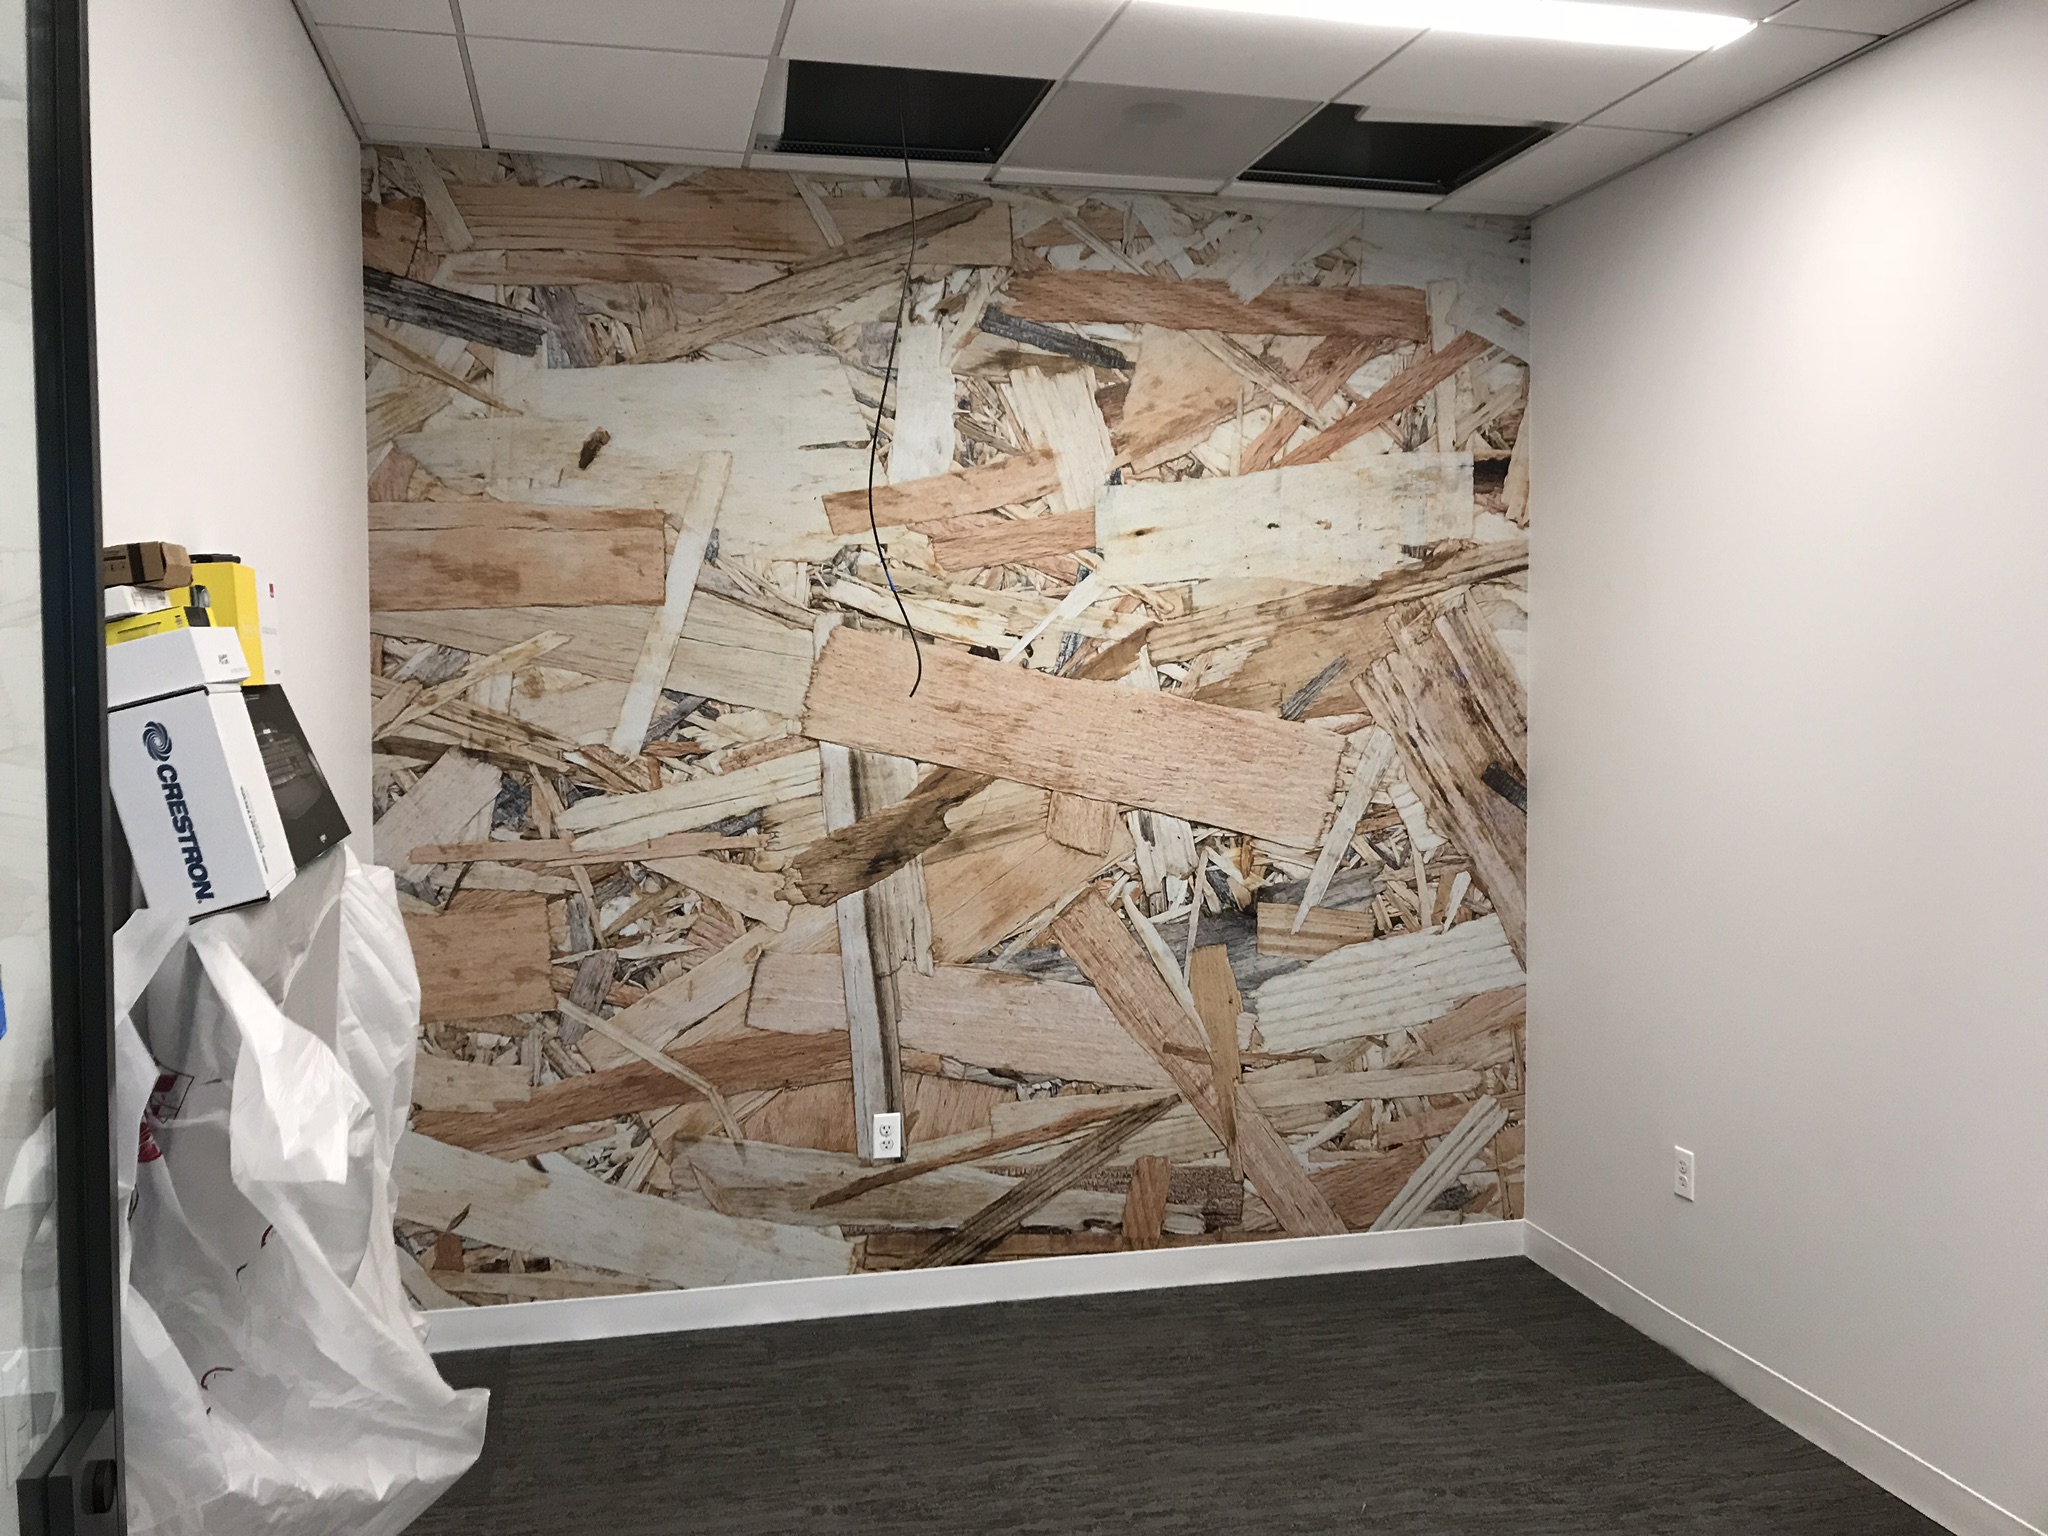 Wall mural of wood scraps in an empty office space created by SpeedPro 